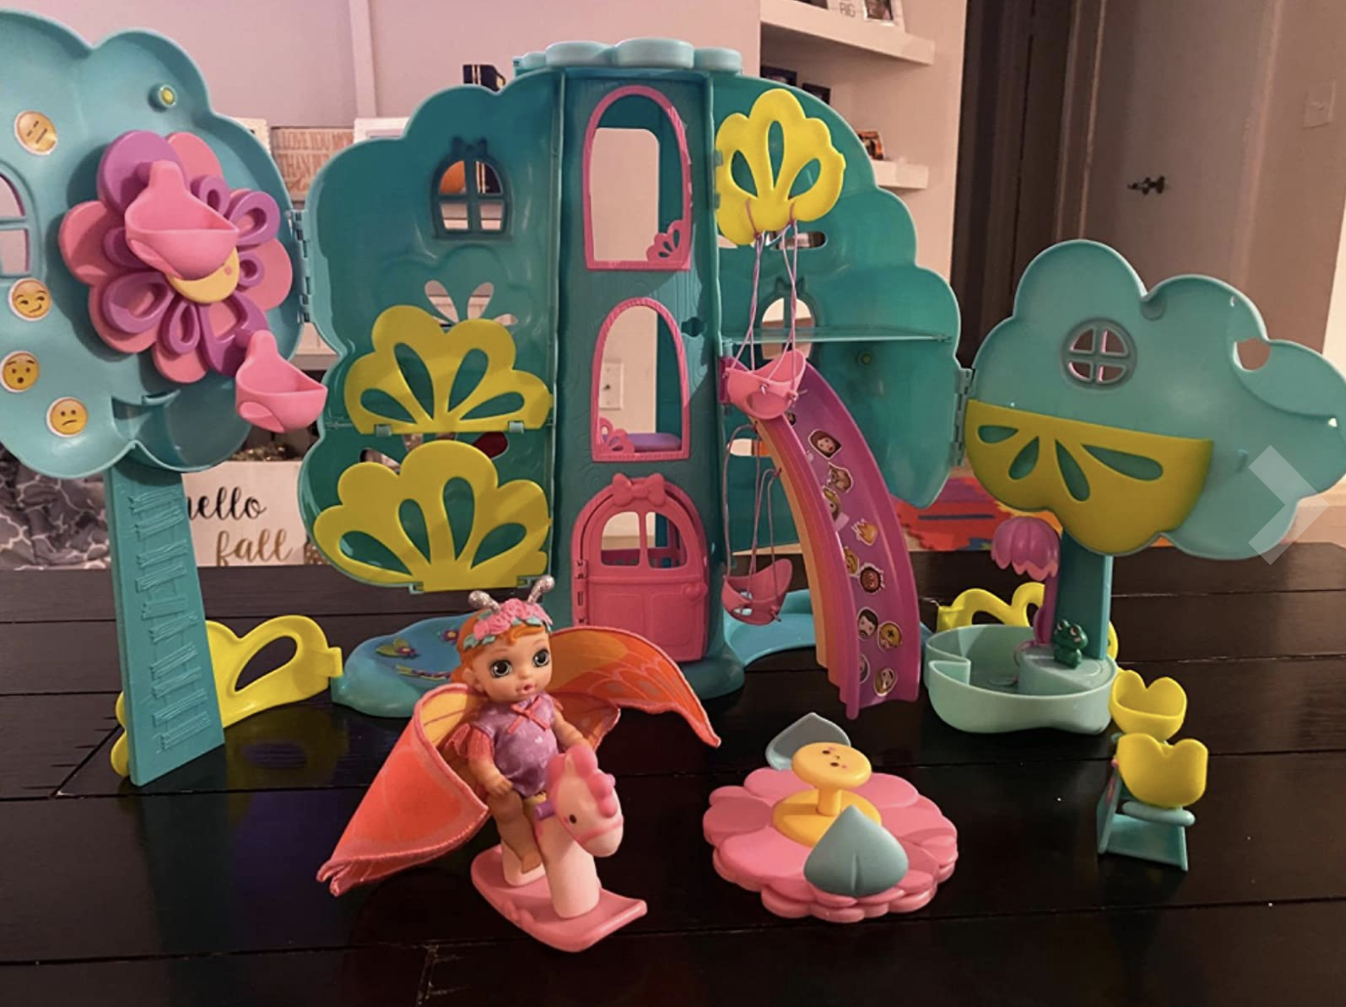 The treehouse playset